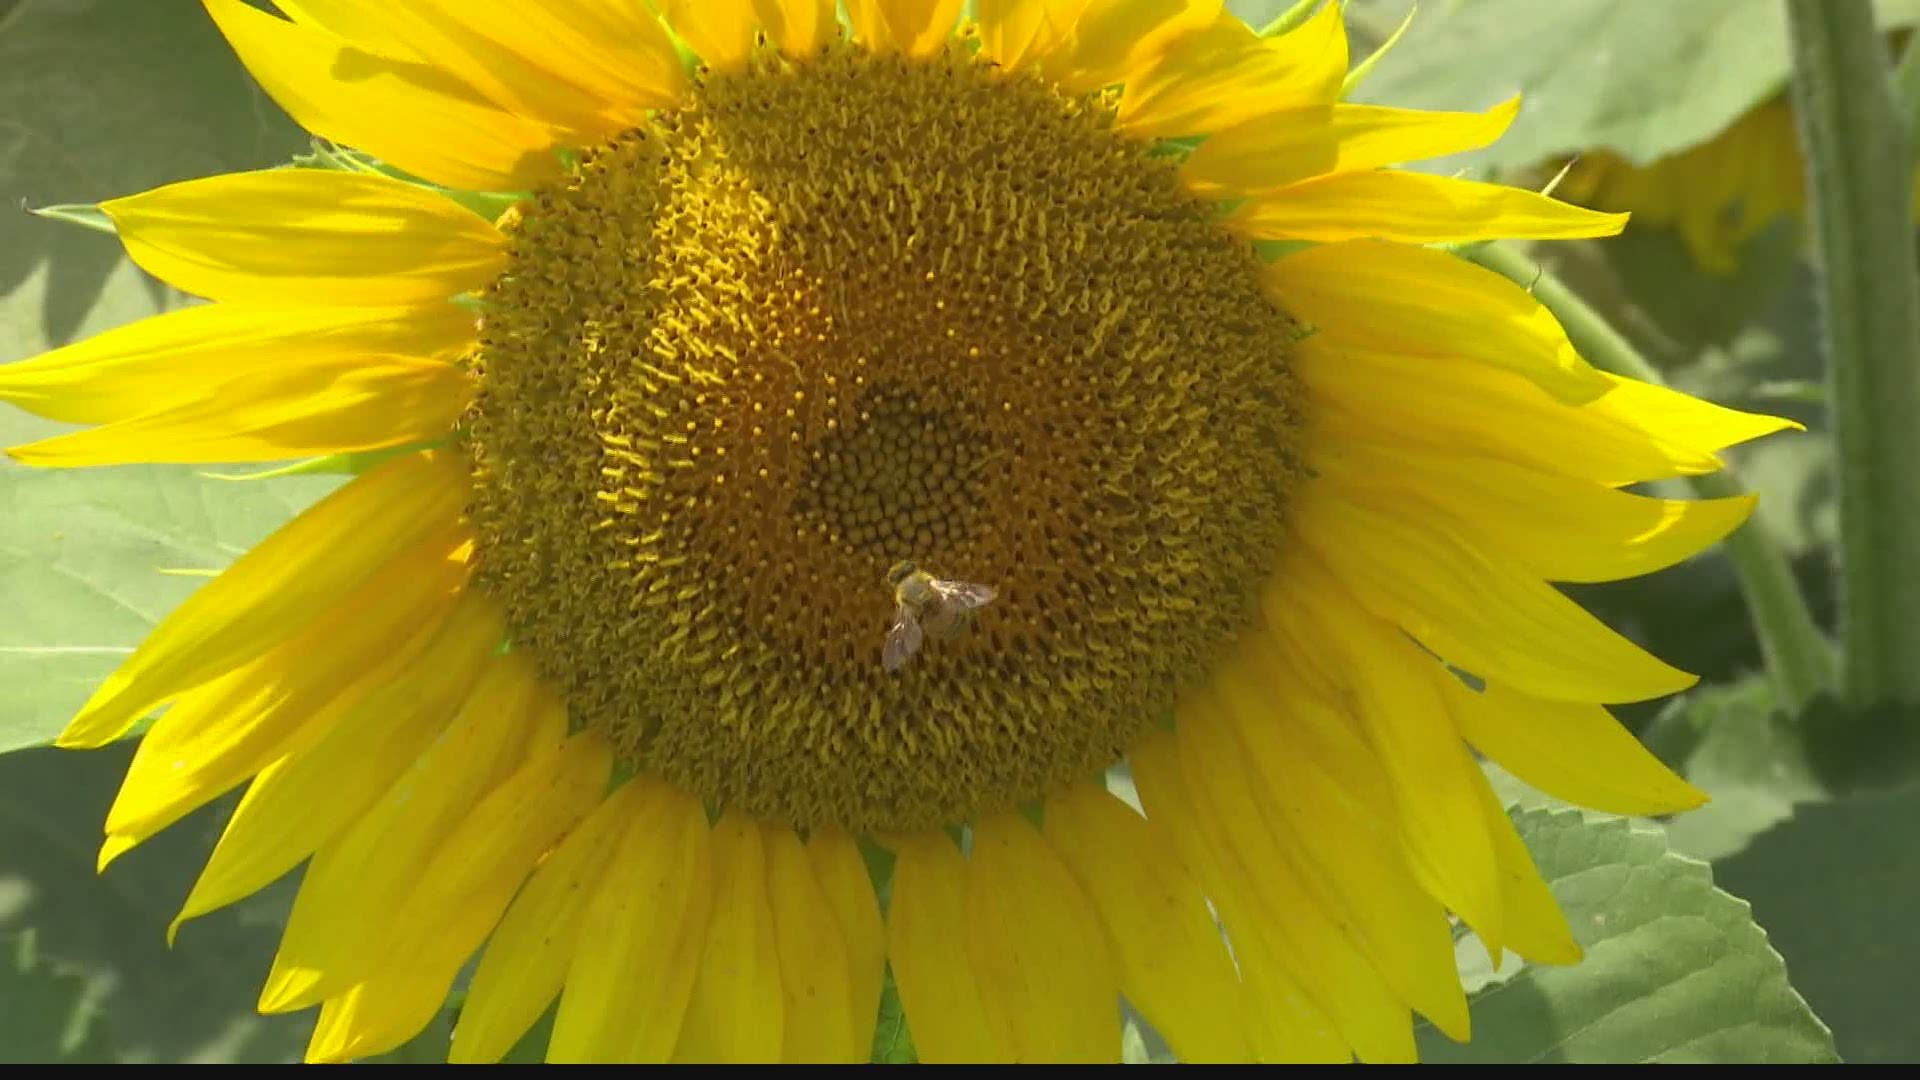 Hundreds of thousands of sunflowers have turned the small Miami County town of Converse into a summer travel destination.